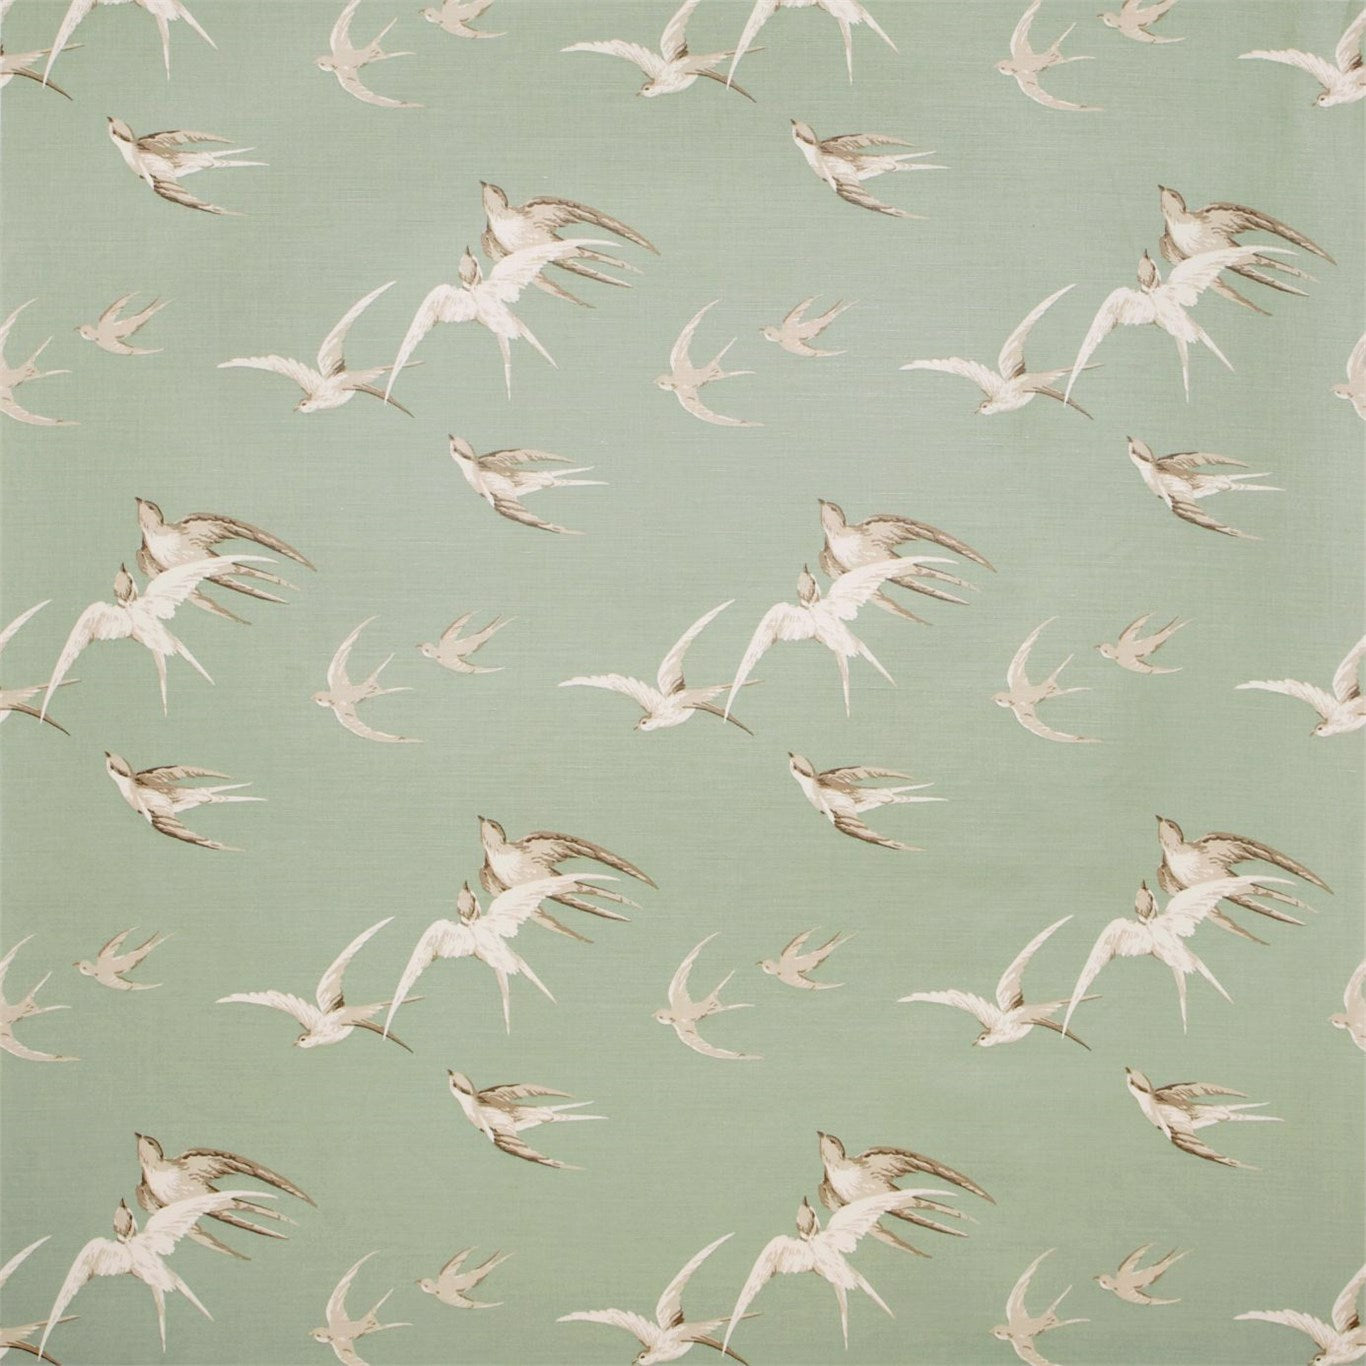 Swallows Fabric by Sanderson